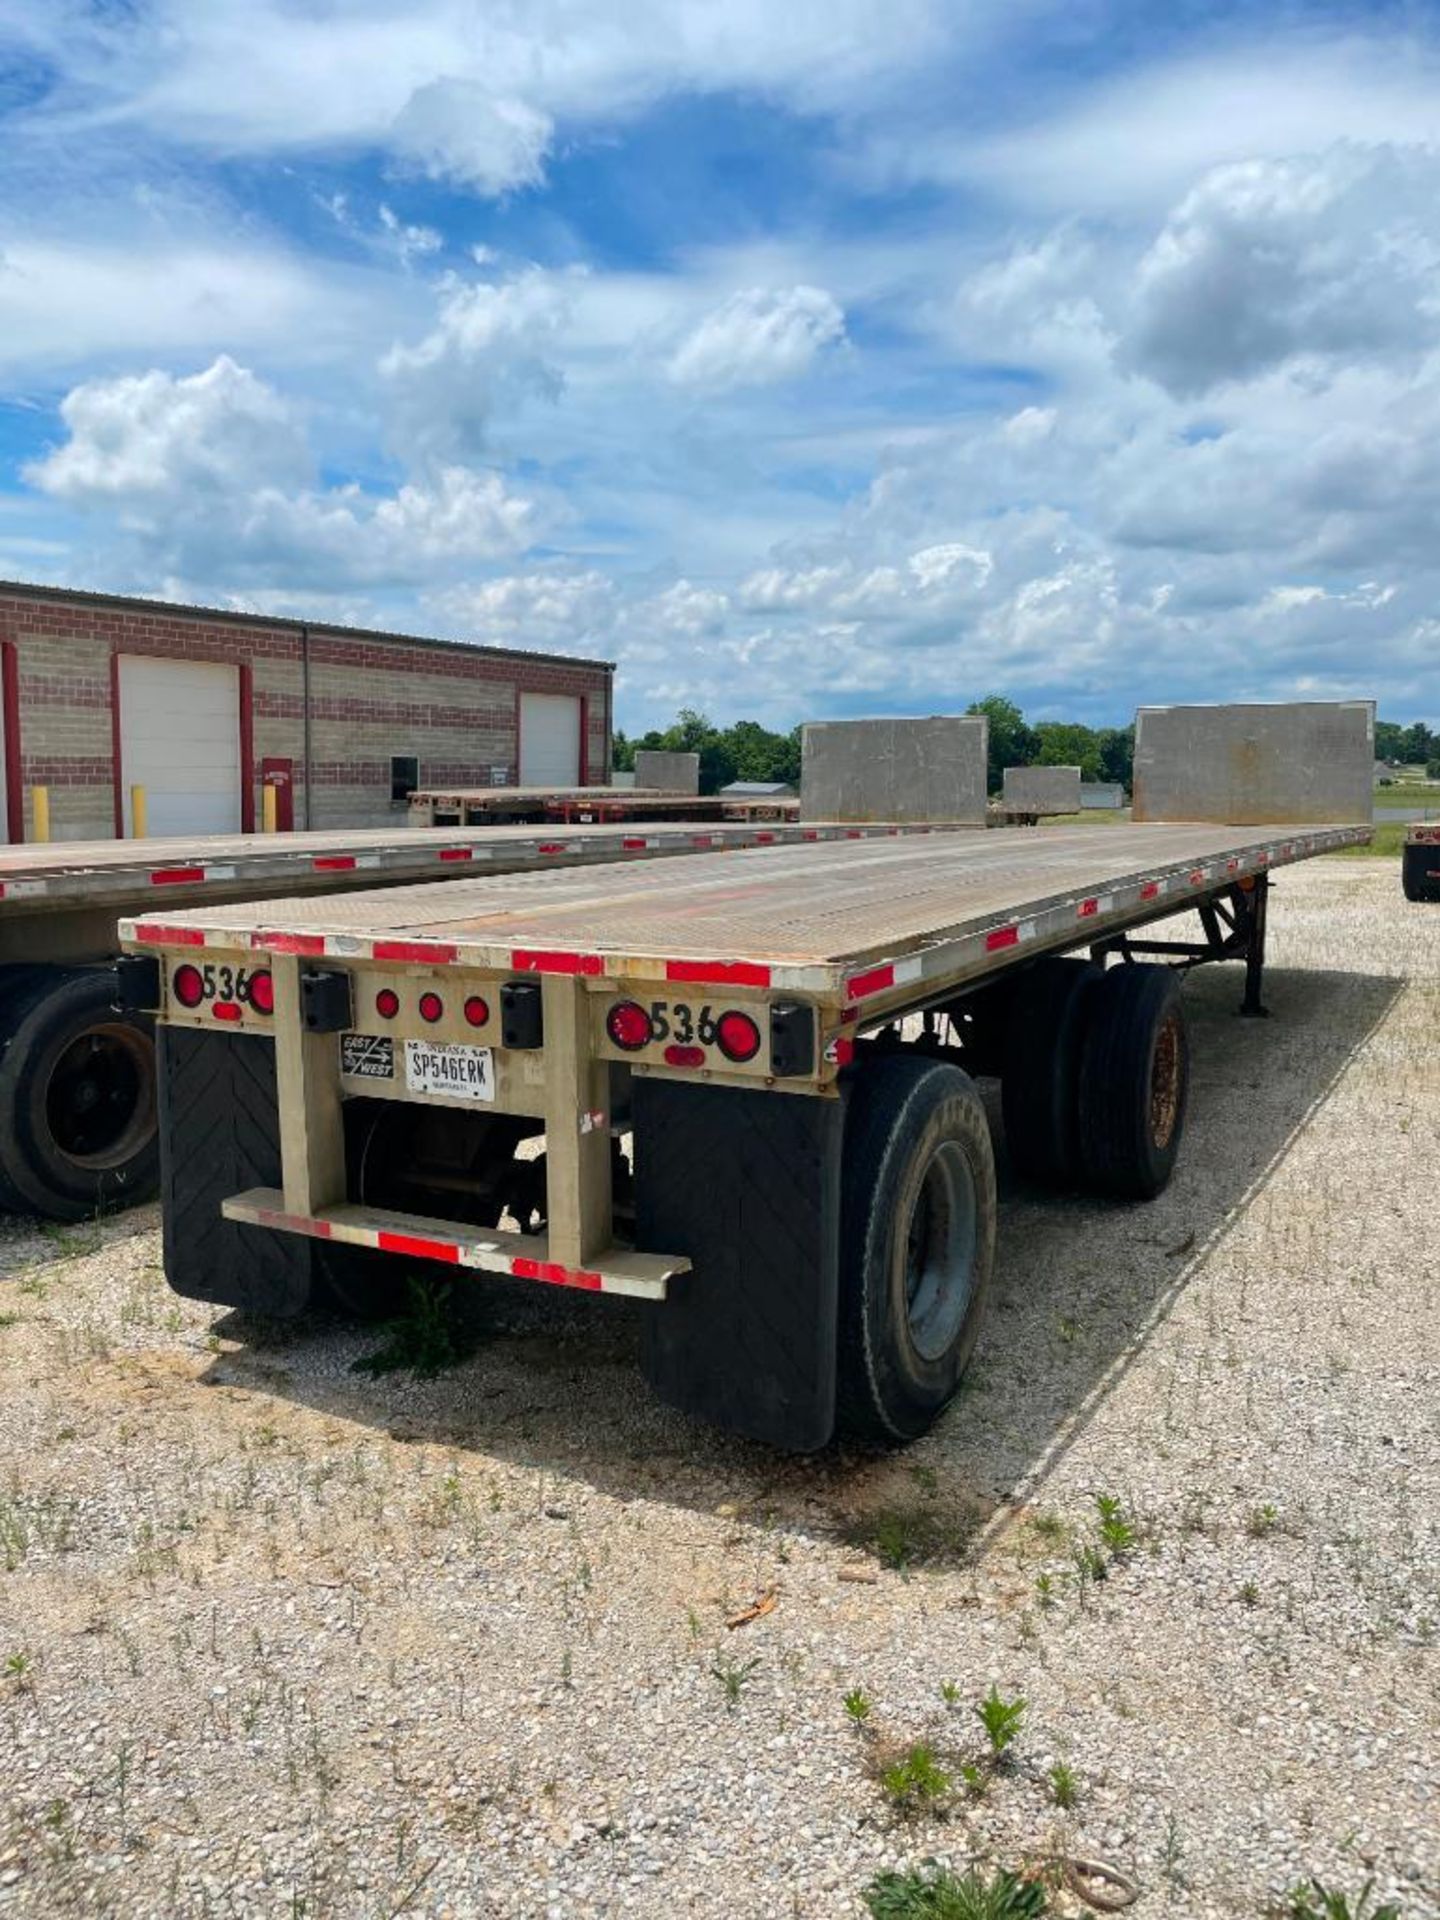 1985 RAVENS 42' ALUMINUM FLATBED TRAILER, DUAL TANDEM SPREAD AXLE, MODEL 54241, WITH HEADACHE - Image 2 of 2